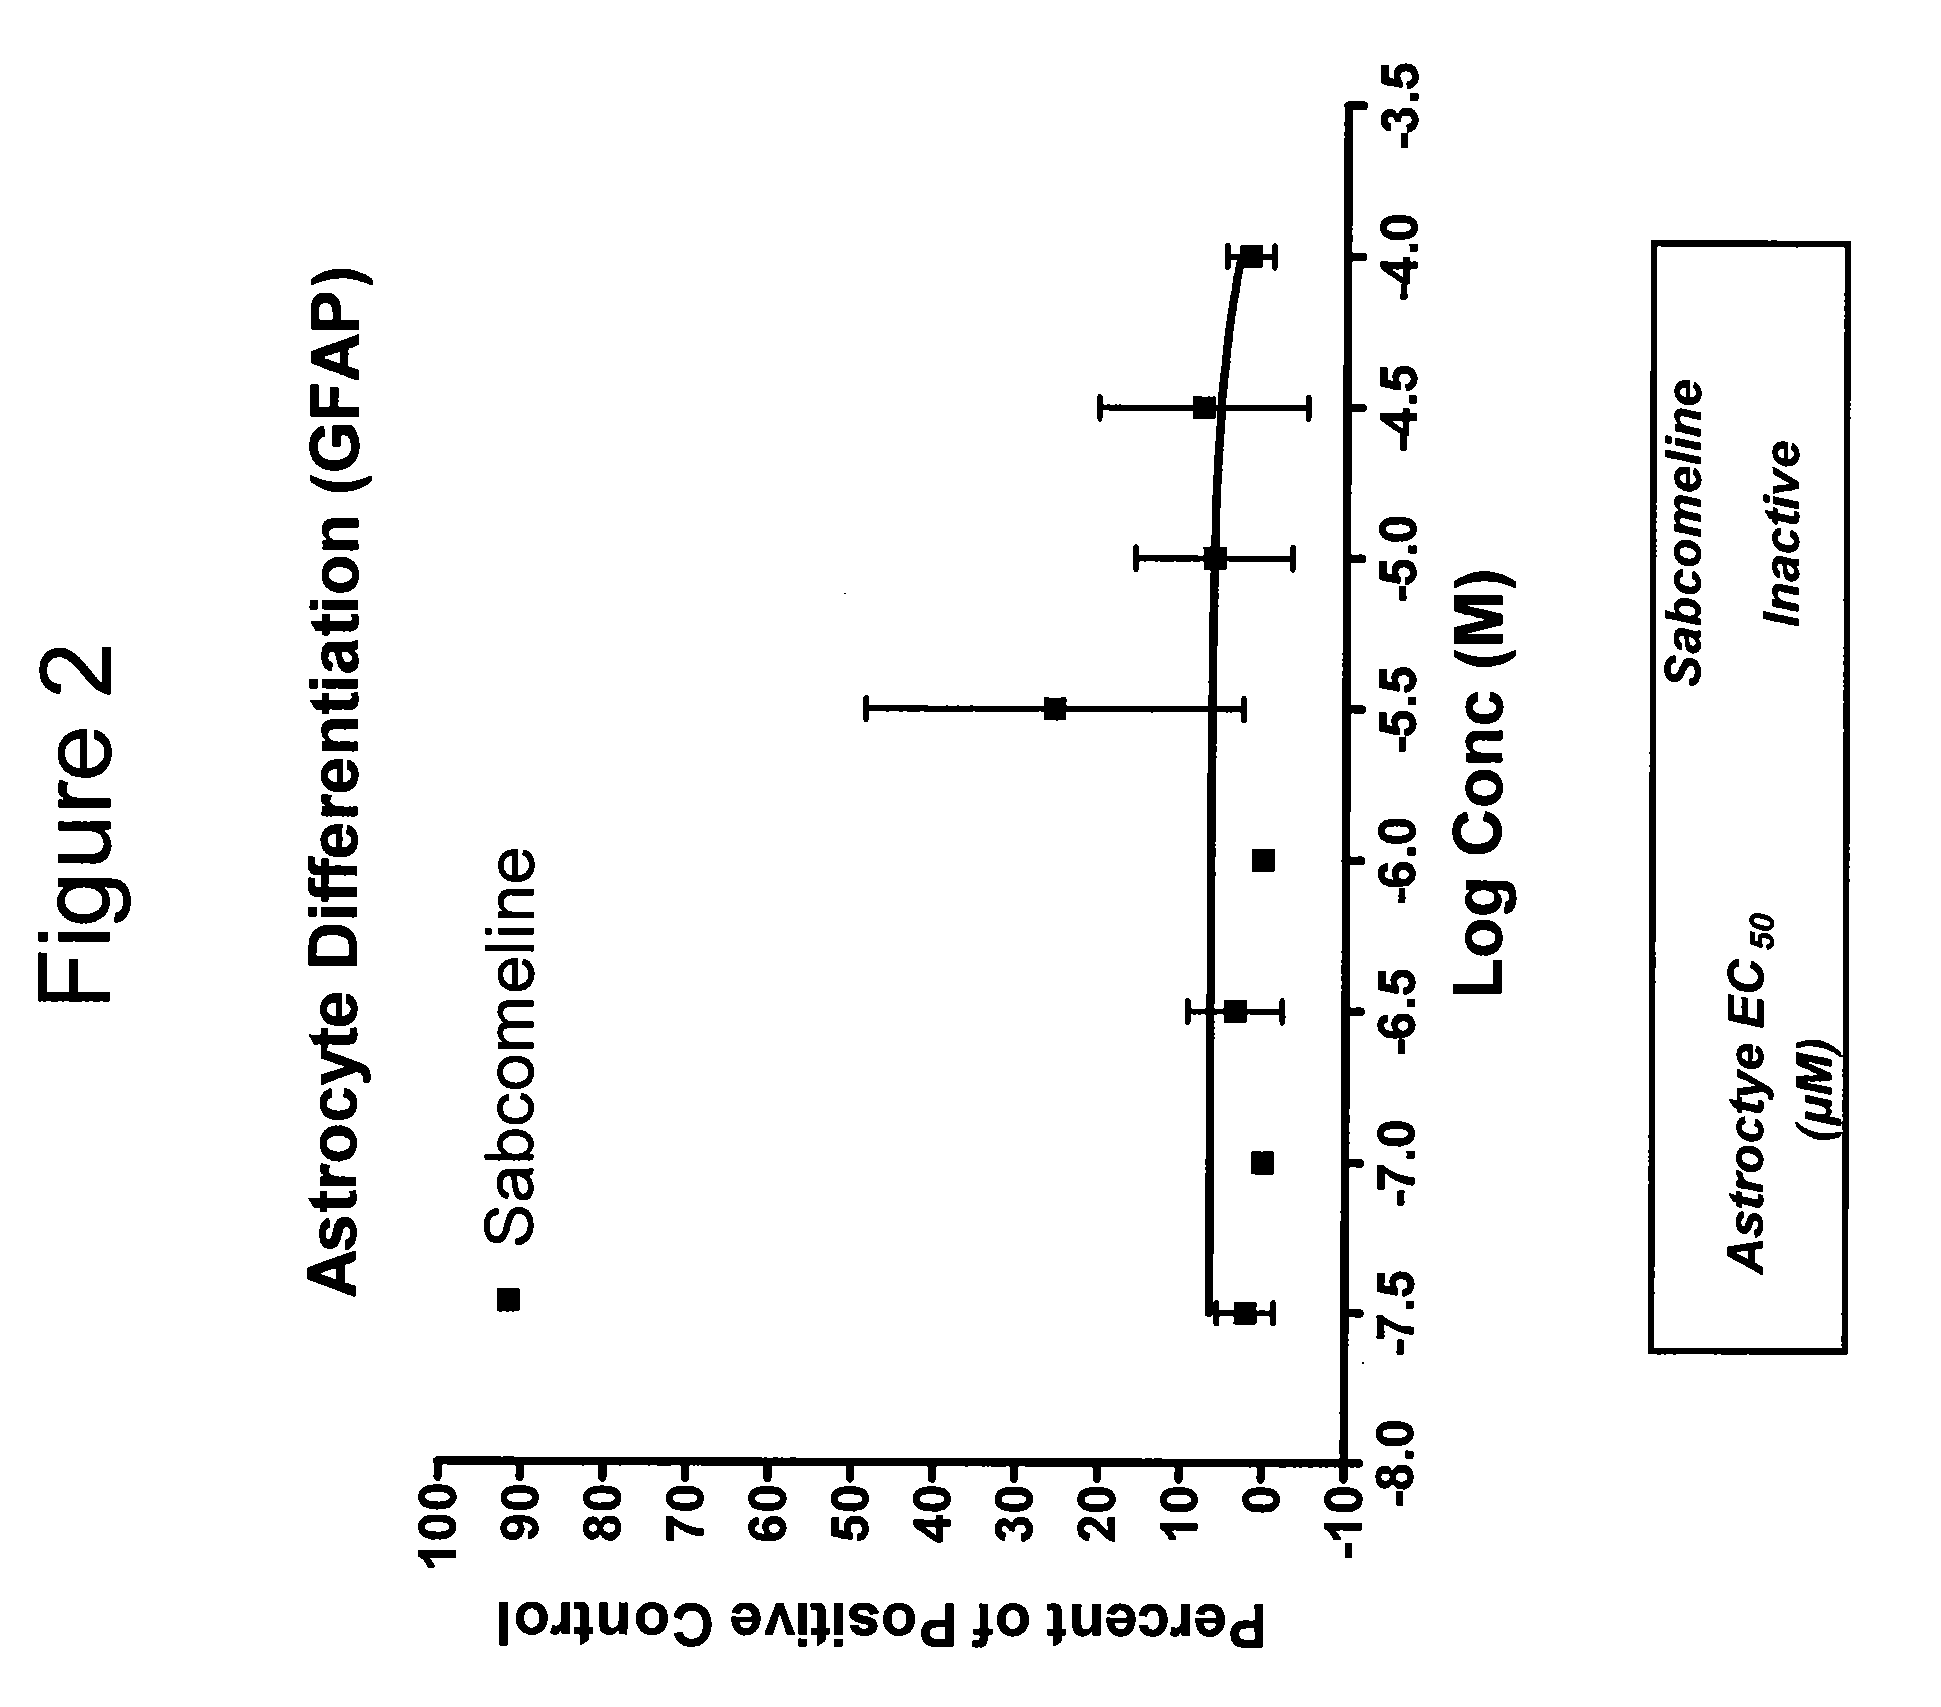 Methods of treating psychiatric conditions comprising administration of muscarinic agents in combination with SSRIs